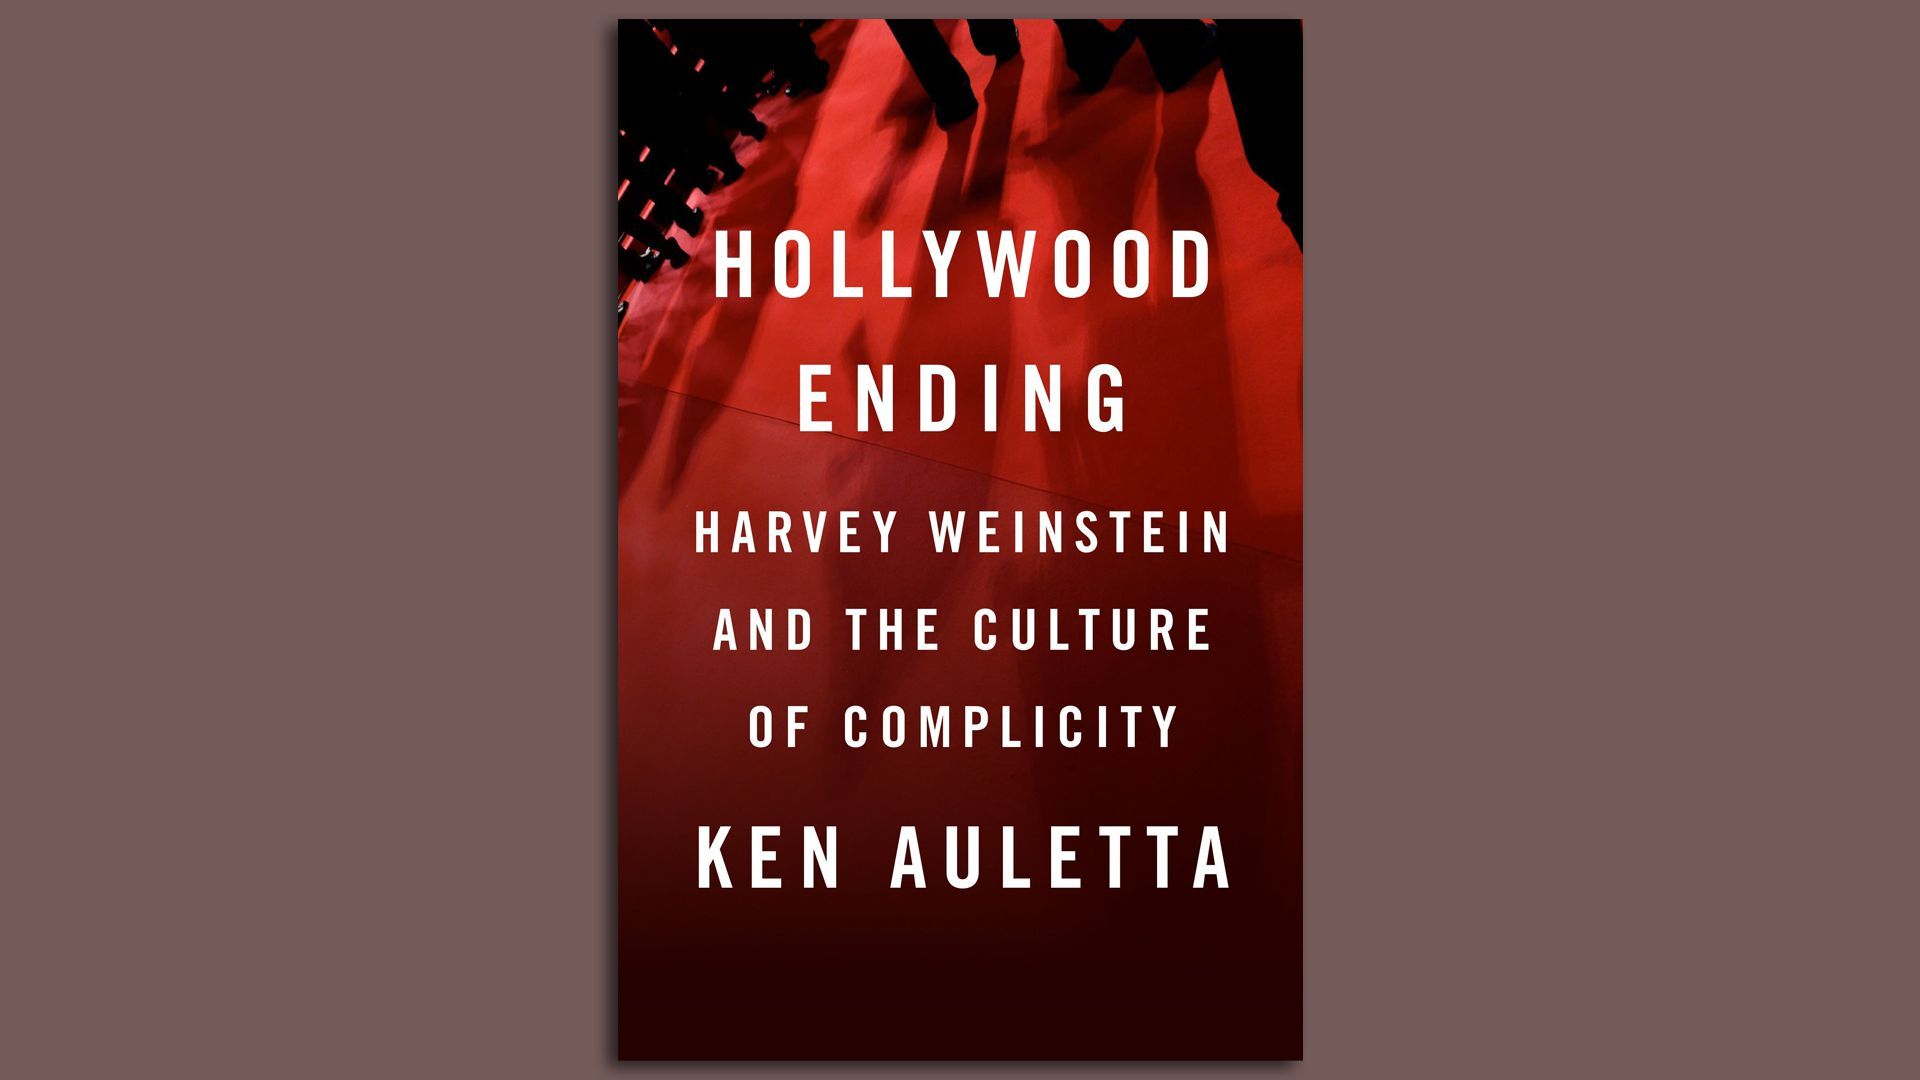 The cover of "Hollywood Ending" by Ken Auletta